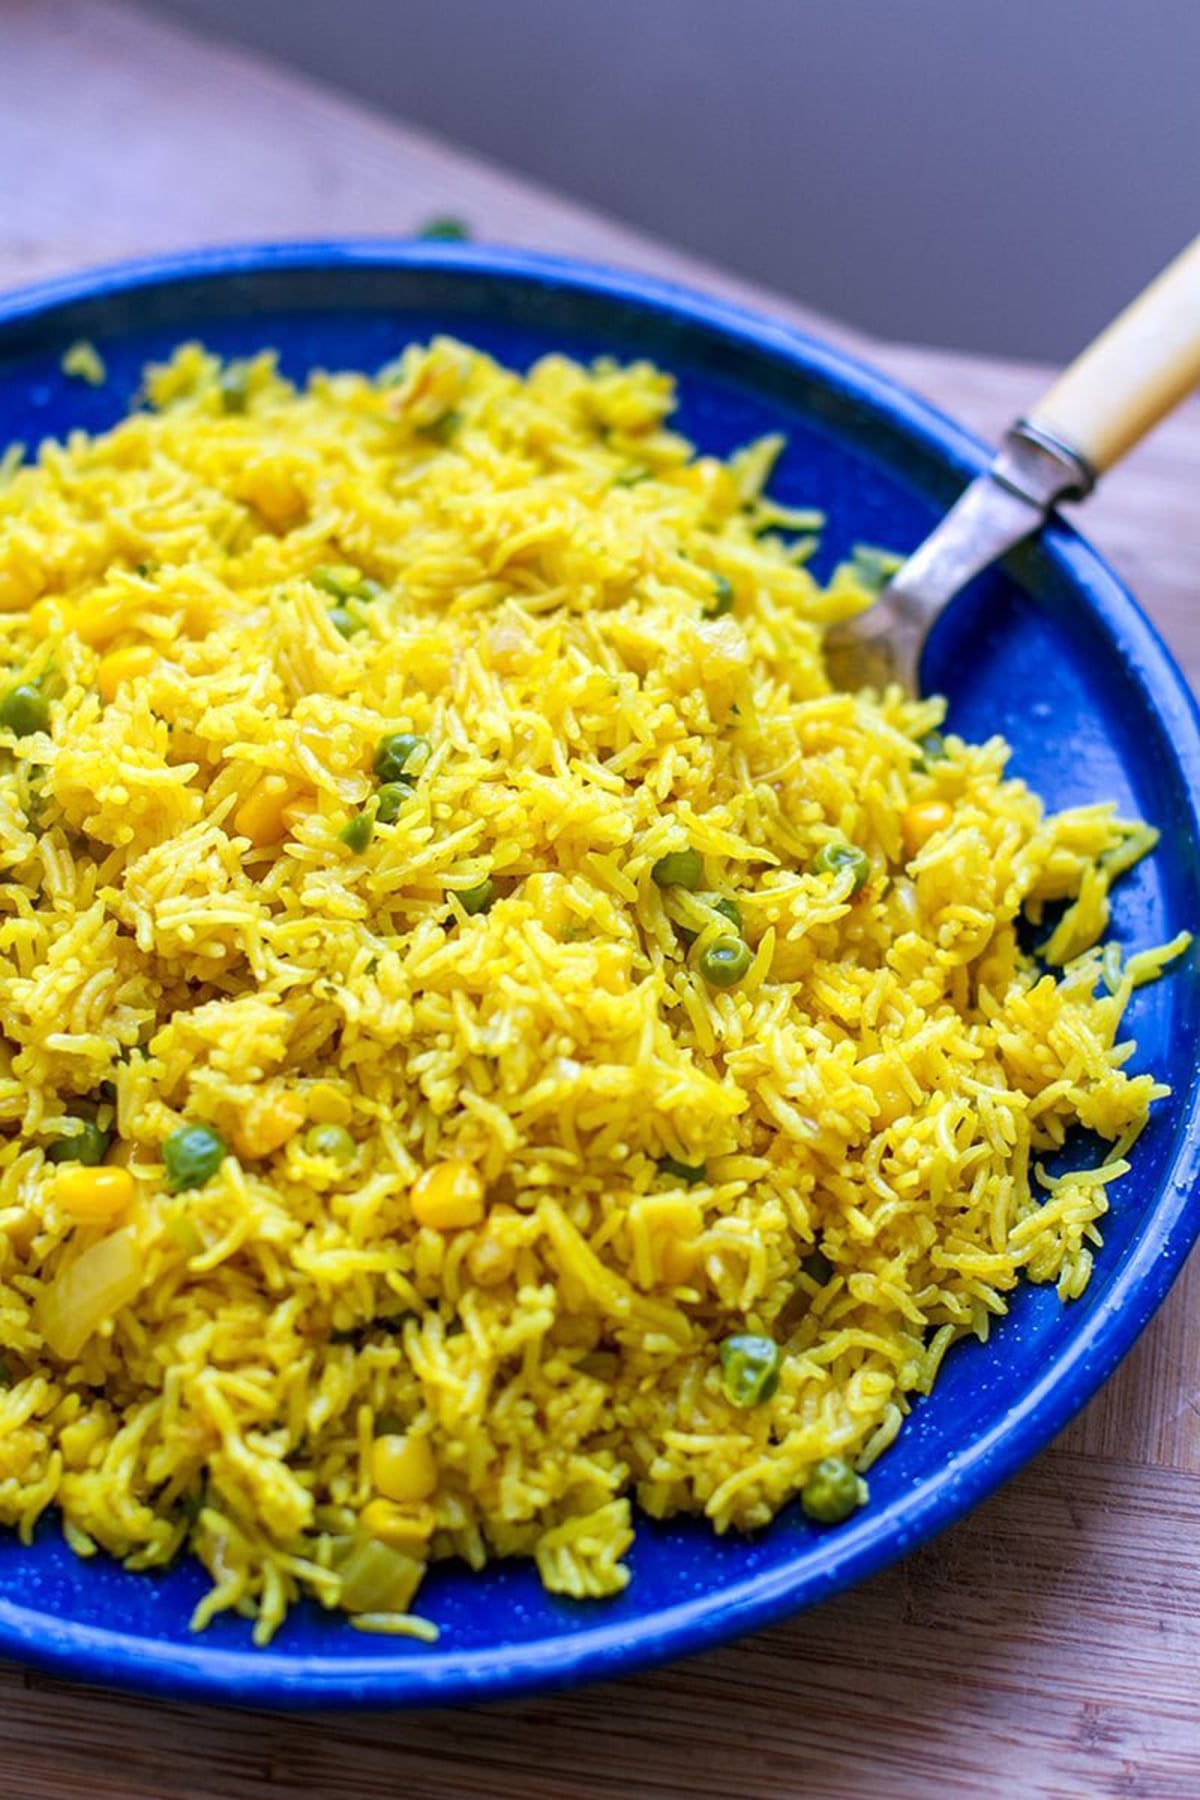 Instant Pot Yellow Rice With Corn & Peas